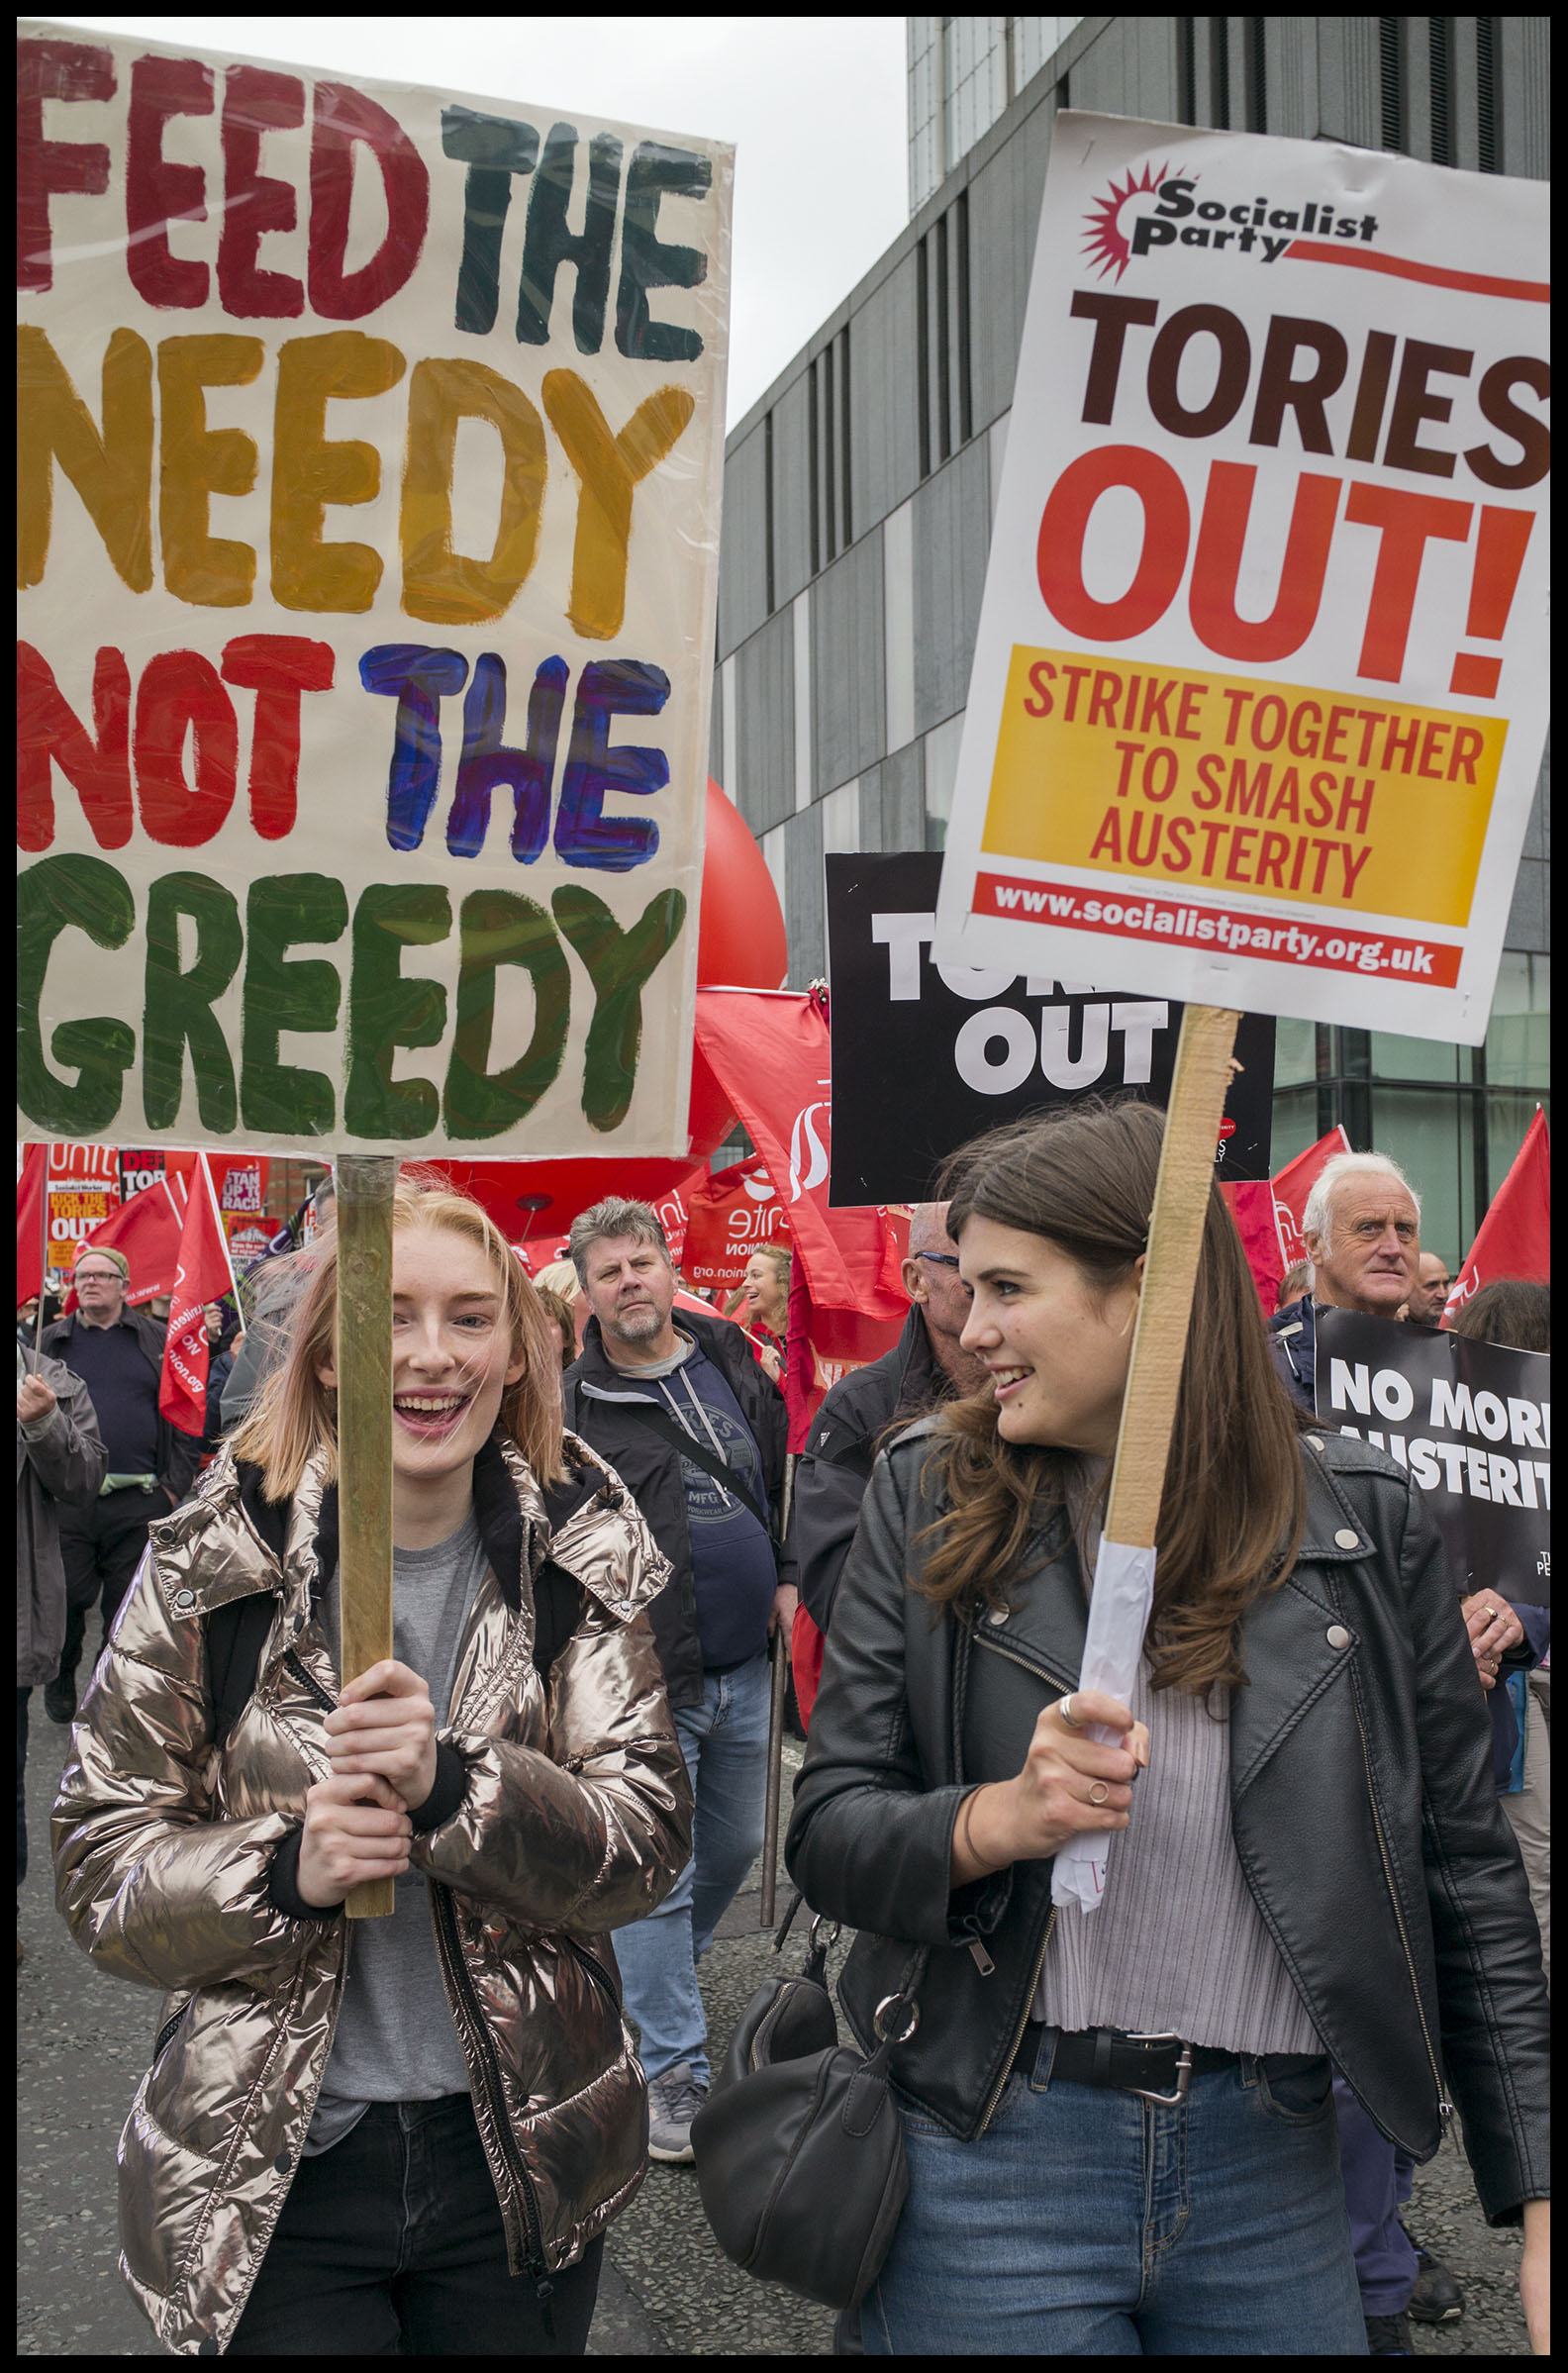 Tories Out demo, Manchester 1.10.17, credit: Paul Mattsson (uploaded 02/10/2017)